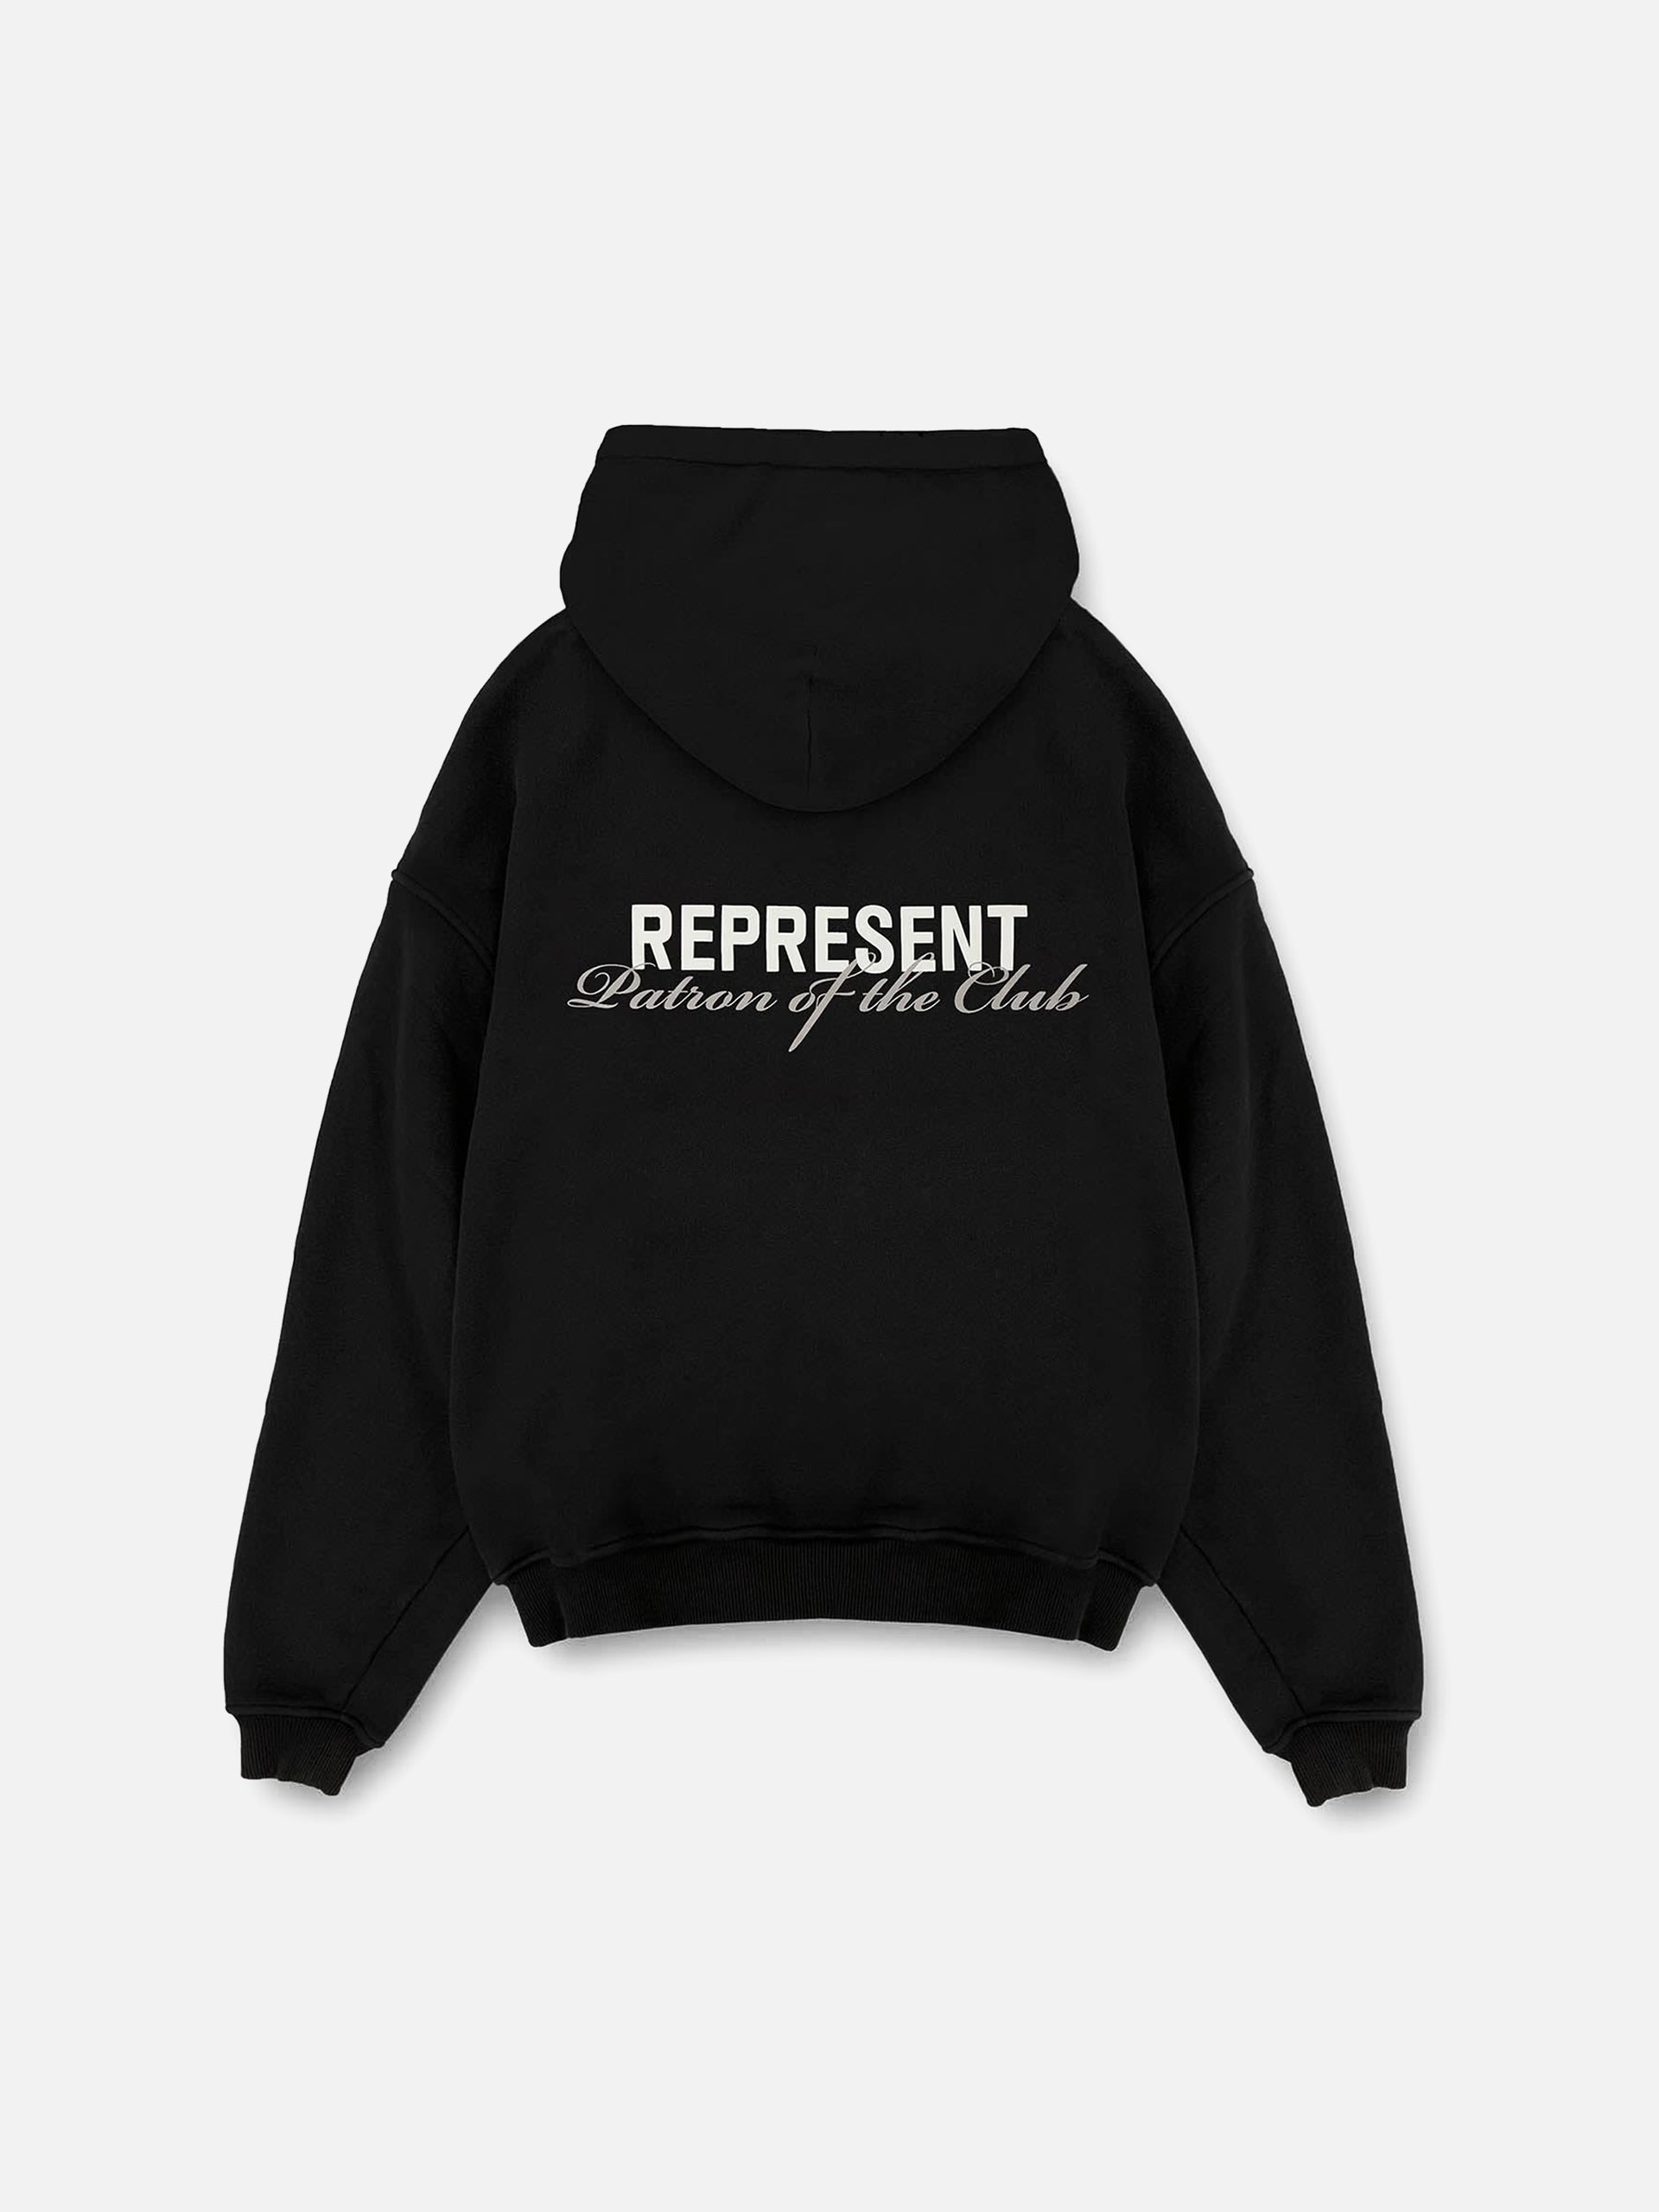 REPRESENT - Patron Of The Club Hoodie